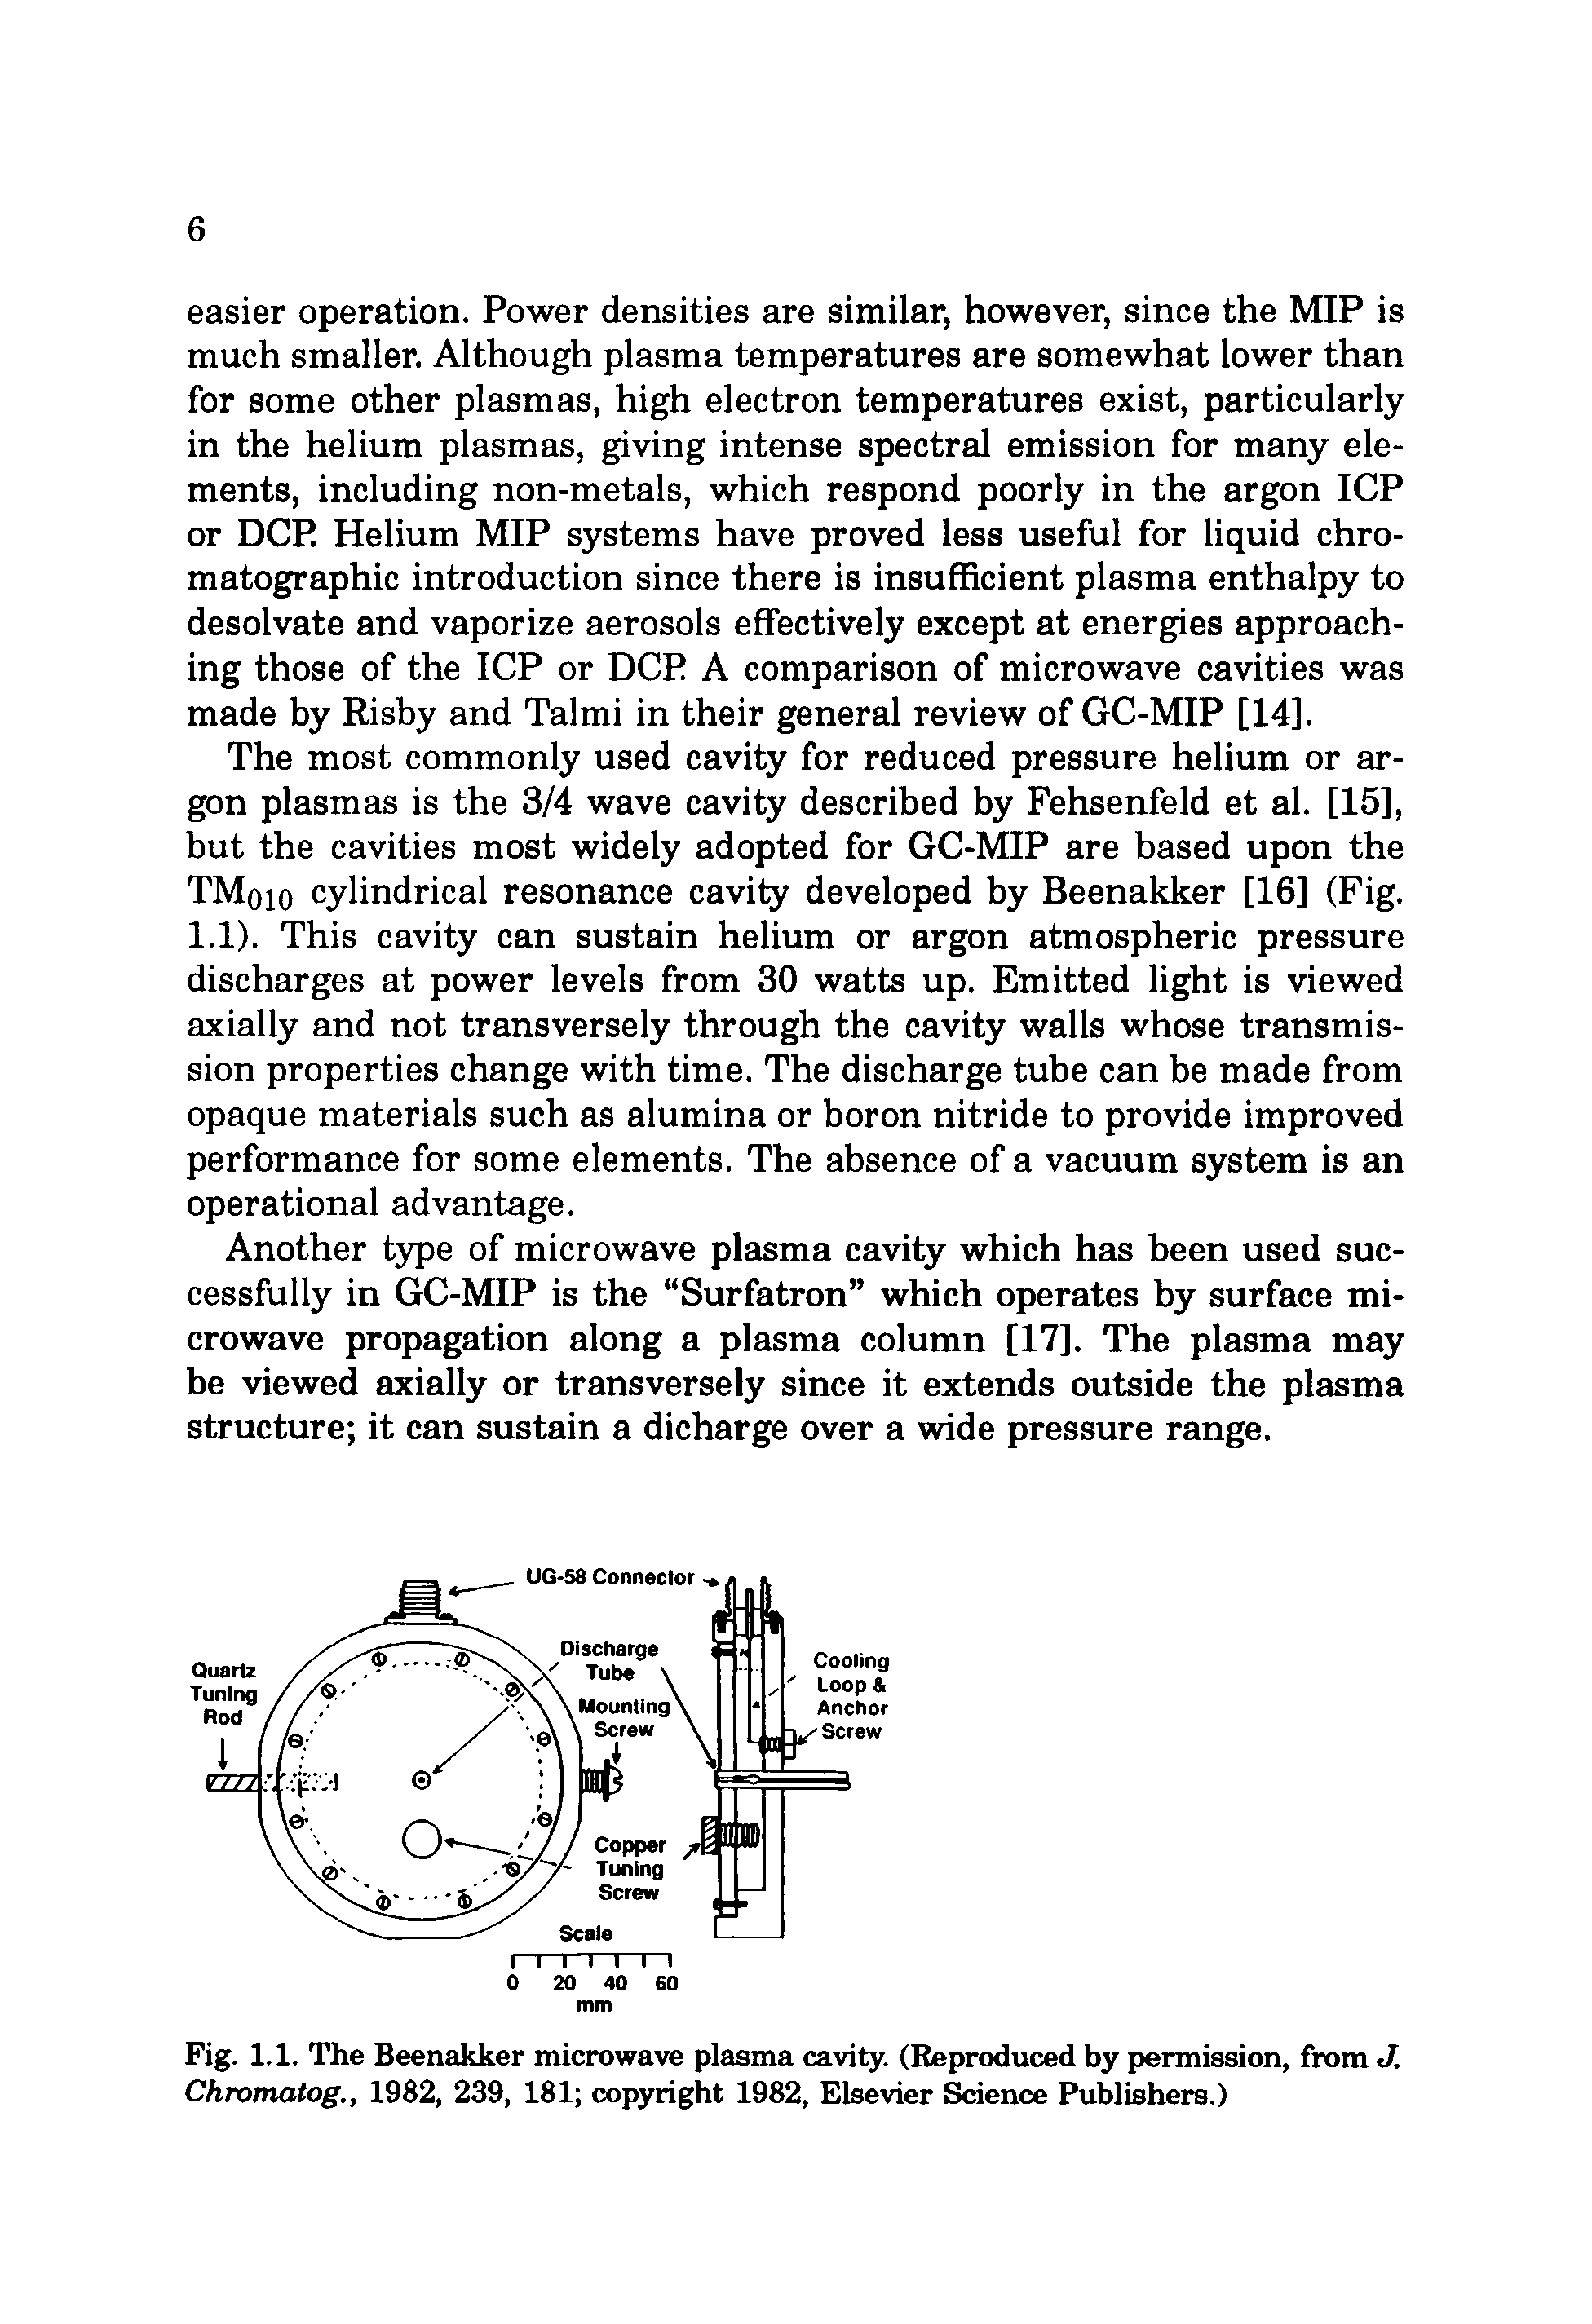 Fig. 1.1. The Beenakker microwave plasma cavity. (Reproduced by permission, from J. Chromatog., 1982, 239, 181 copyright 1982, Elsevier Science Publishers.)...